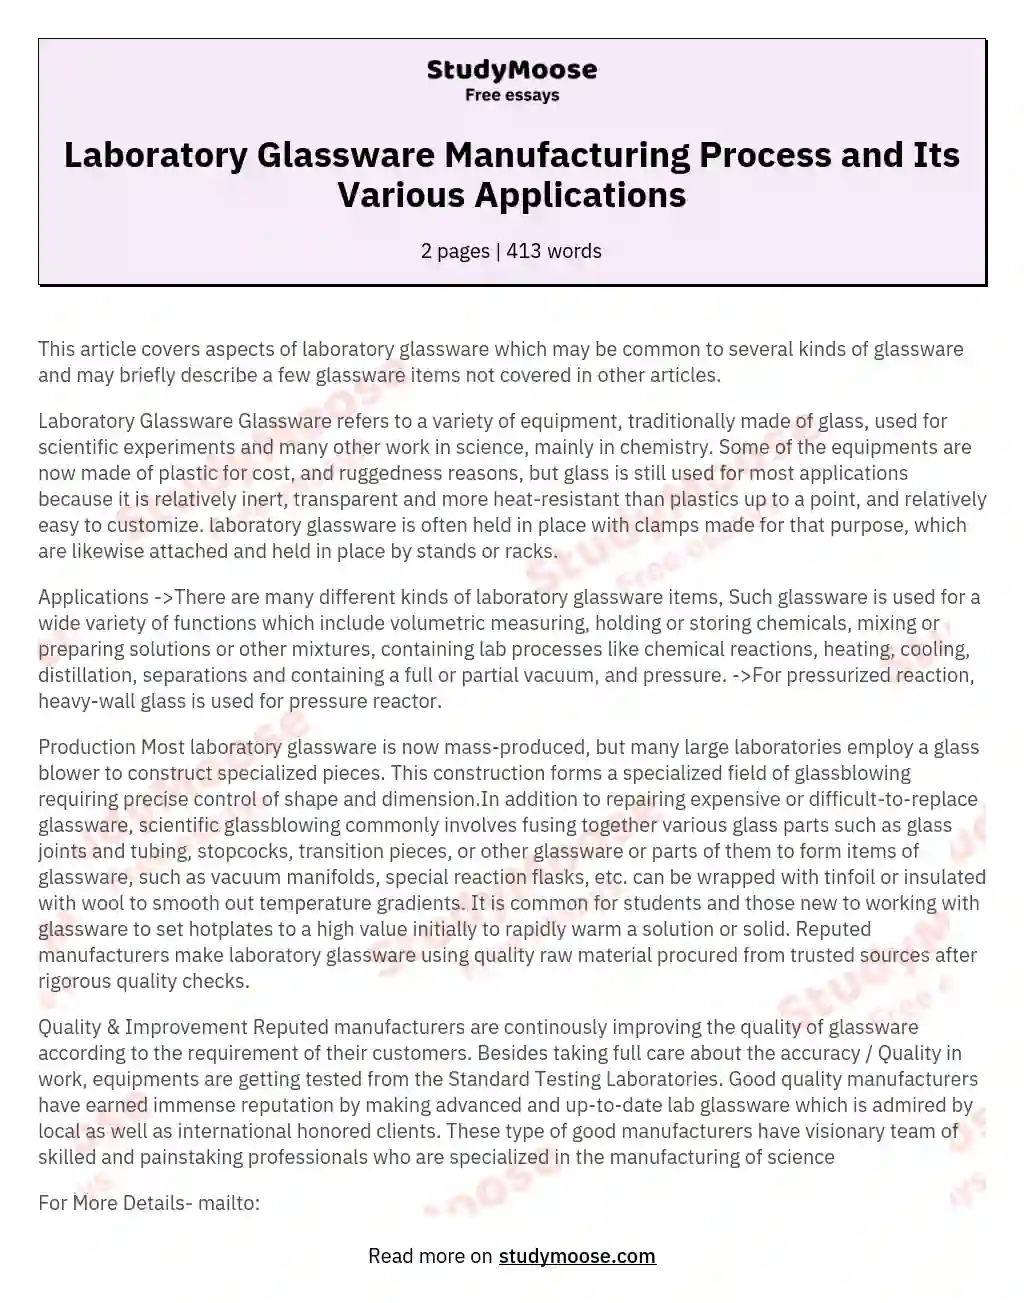 Laboratory Glassware Manufacturing Process and Its Various Applications essay